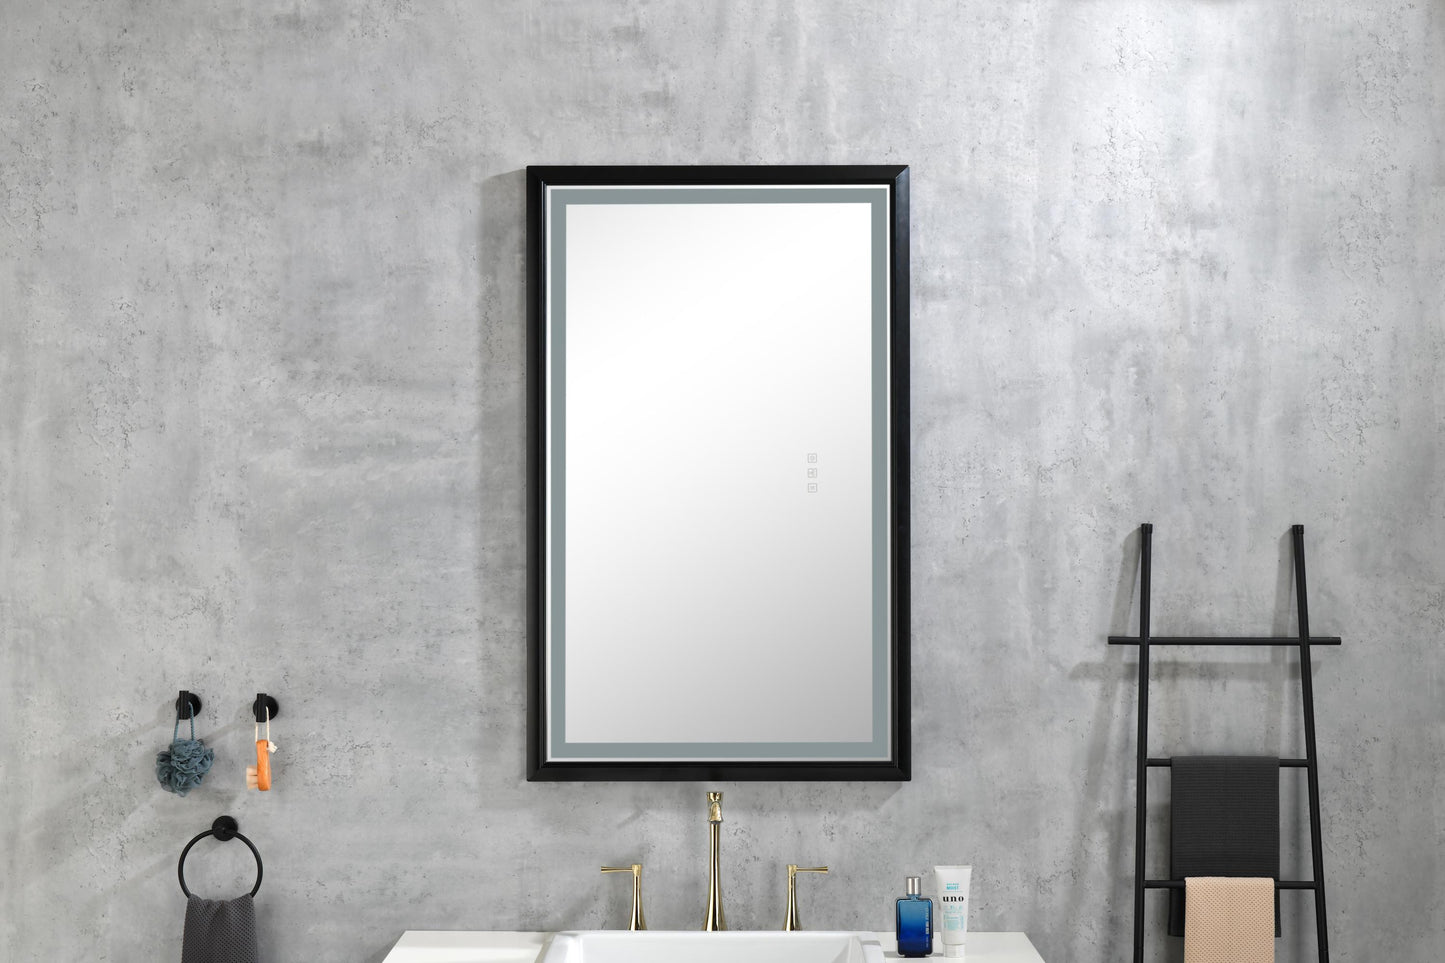 42 in. W x24 in. H Oversized Rectangular Black Framed LED Mirror Anti-Fog Dimmable Wall Mount Bathroom Vanity Mirror